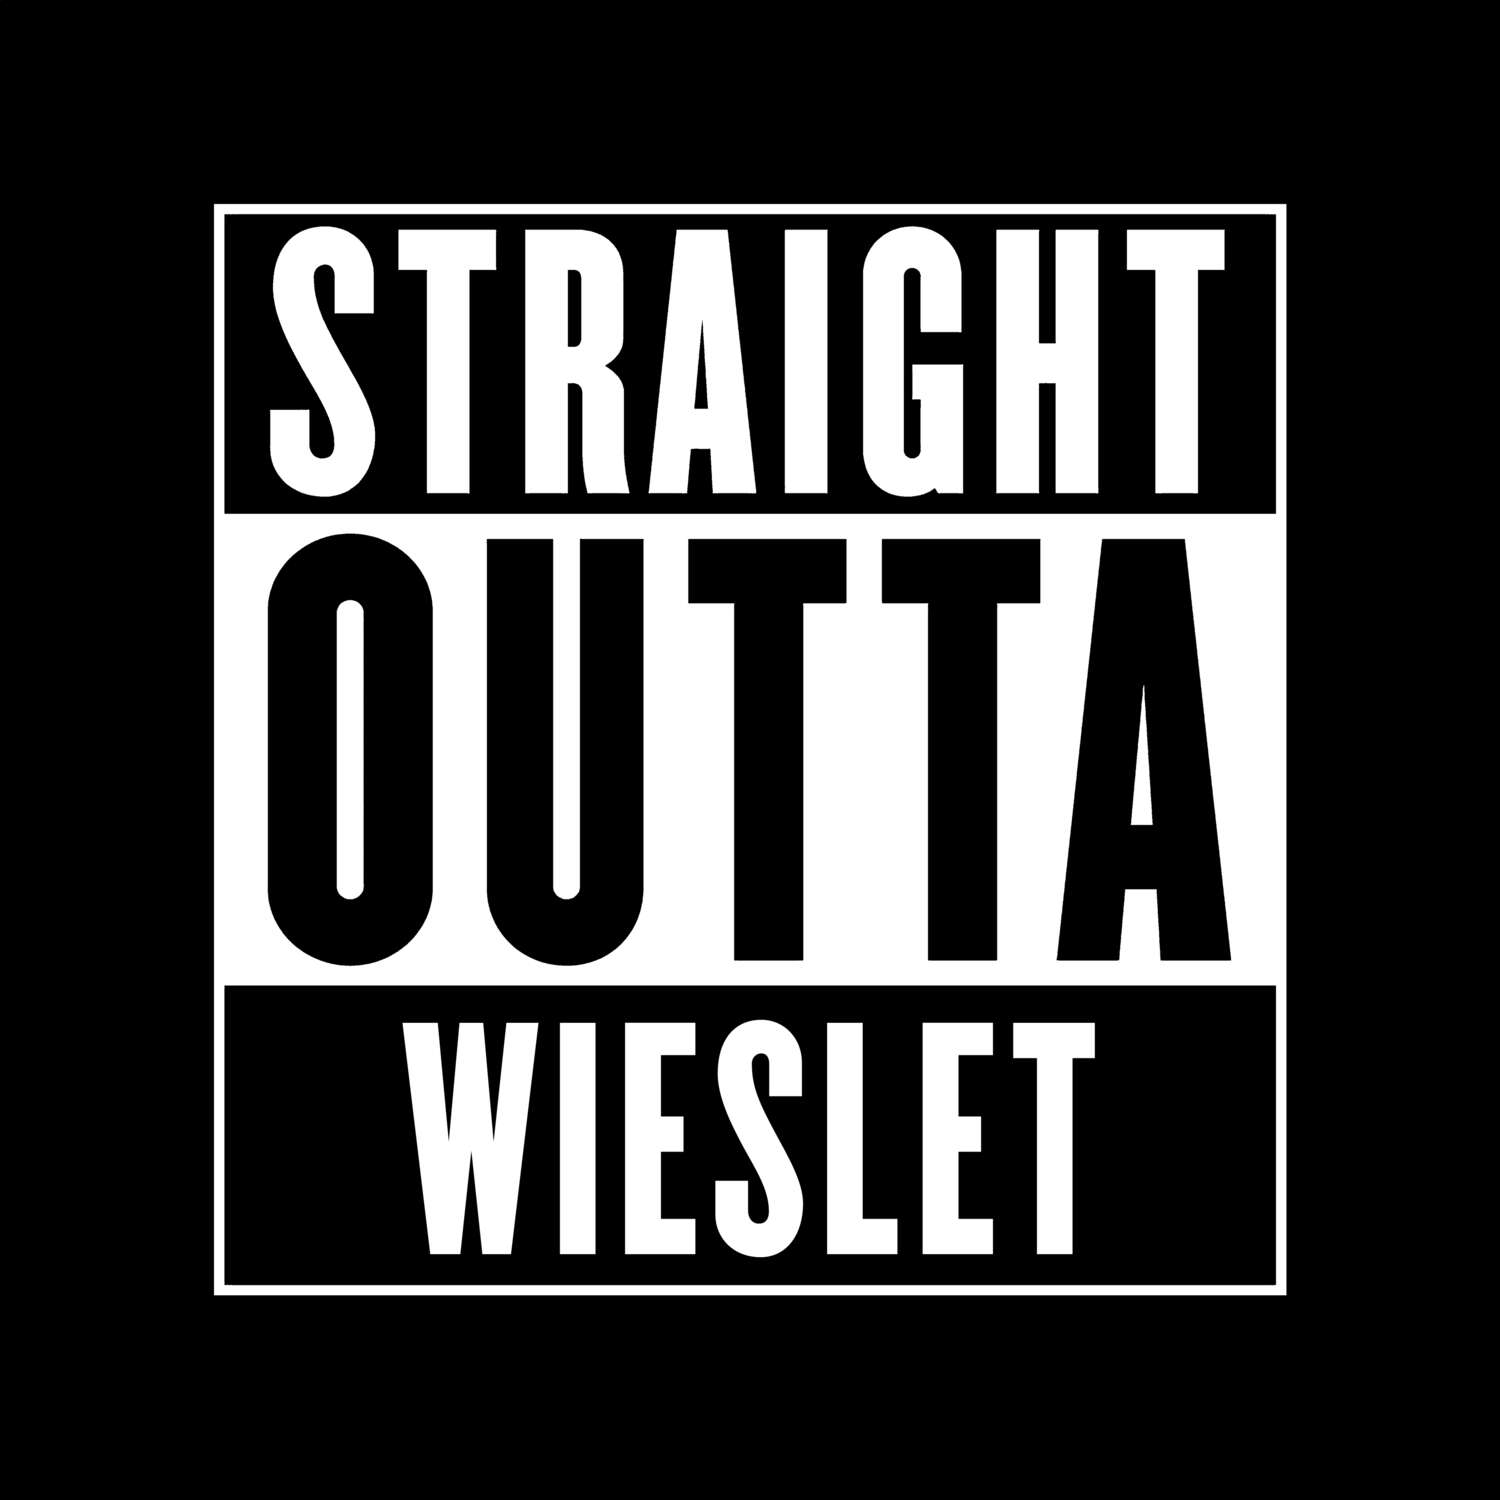 Wieslet T-Shirt »Straight Outta«